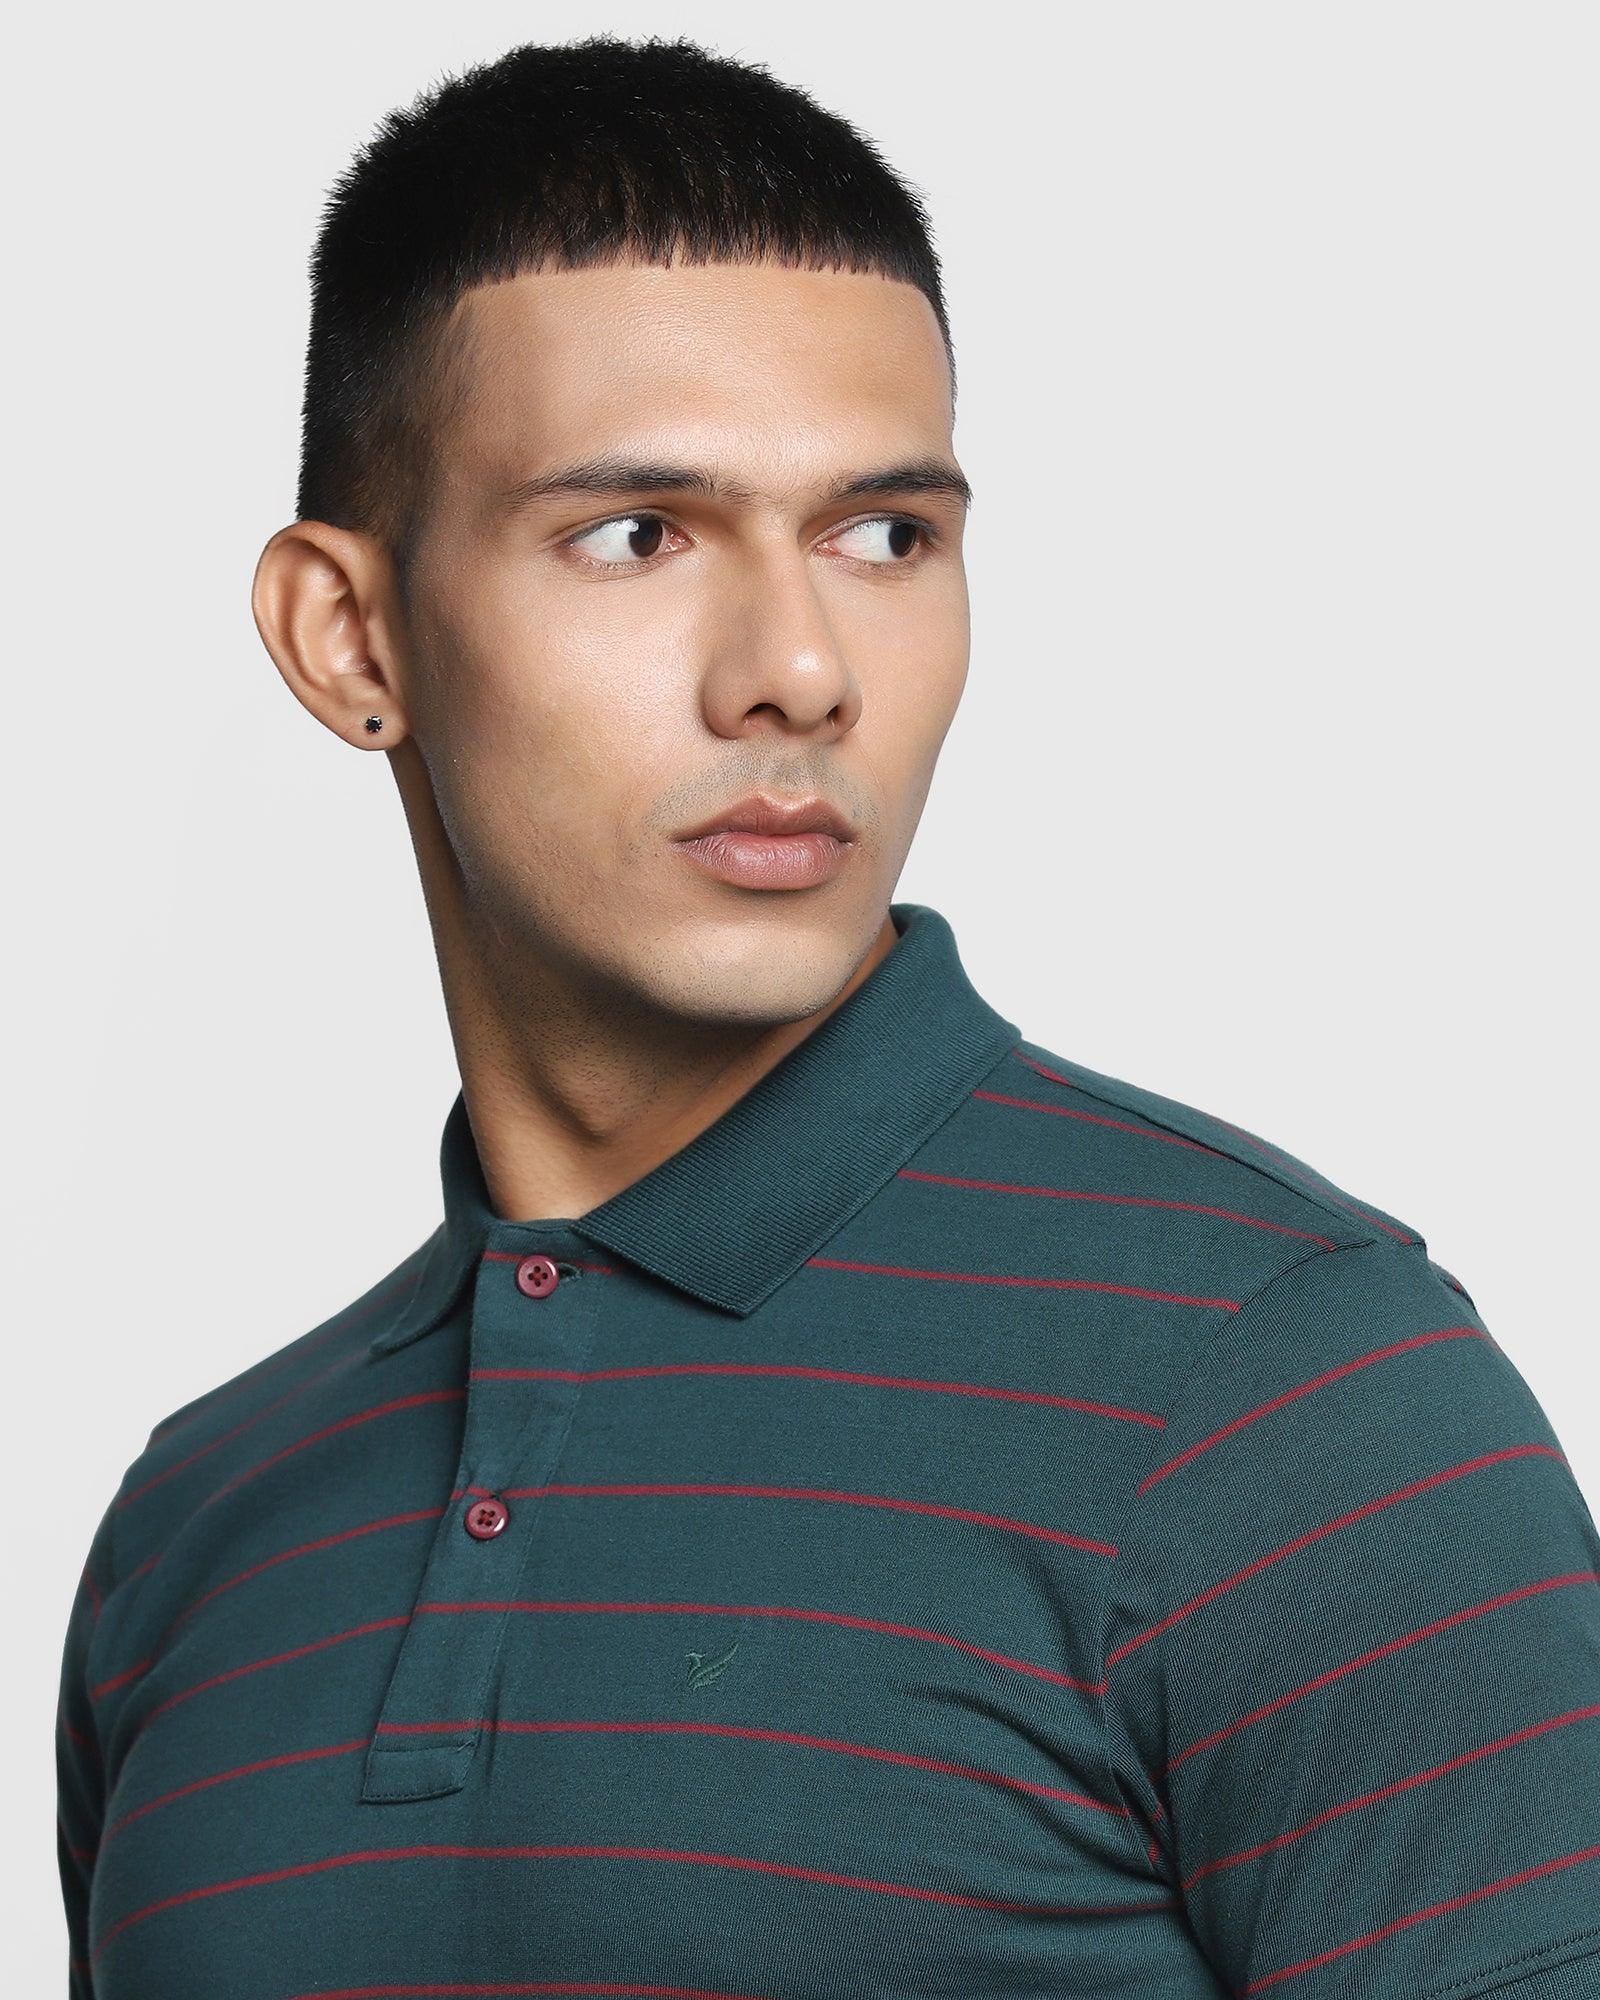 Polo Teal Green Striped T Shirt - Charles